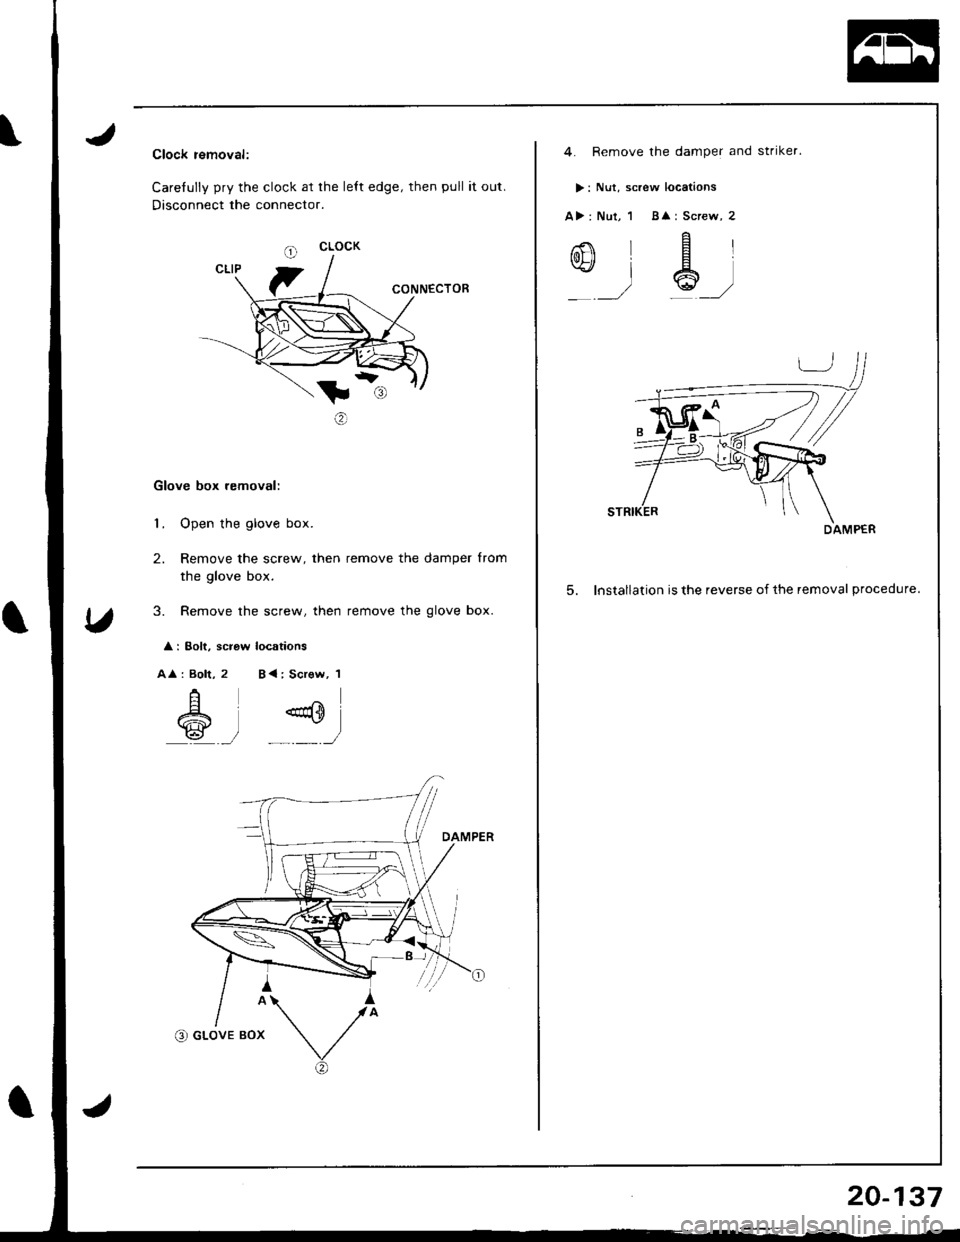 HONDA INTEGRA 1998 4.G Workshop Manual Clock removal:
Carefully pry the clock at the lett edge, then pull it out.
Disconnect the connecto..
CONNECTOE
t:
o
Glove box removal:
1. Open the glove box.
2. Remove the screw, then remove the dampe